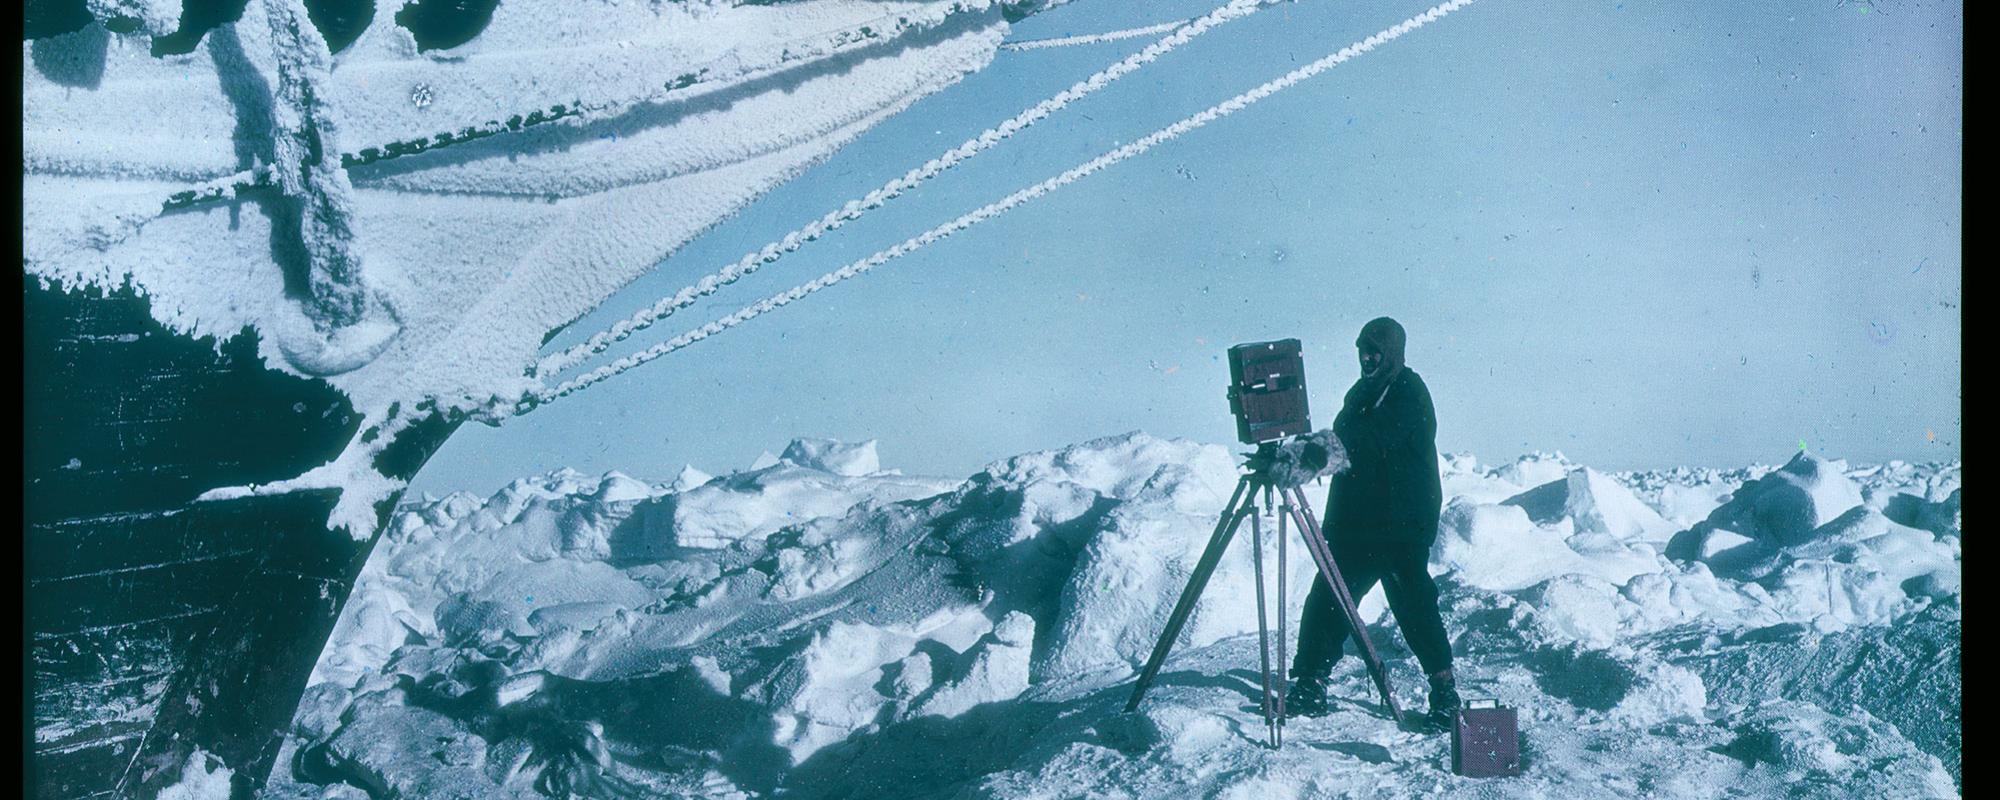 A man operates a large 20th century camera amid a snowy tundra, in front of a docked ship.